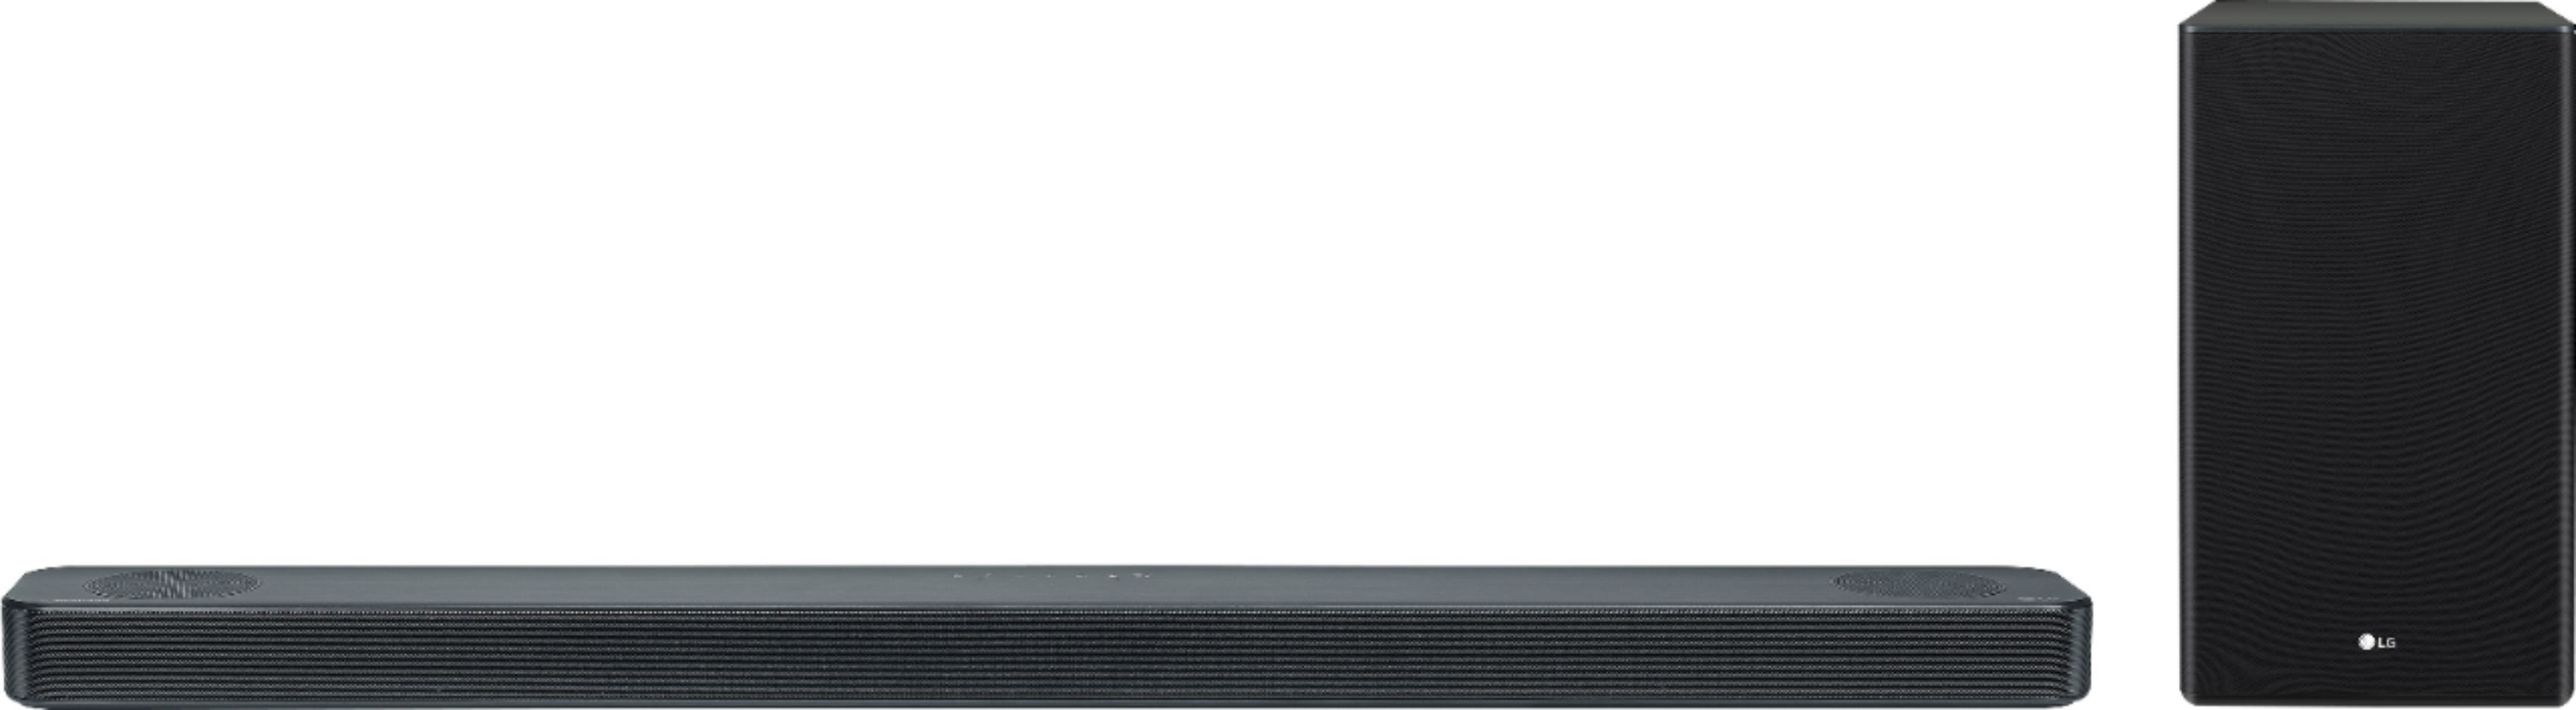 typisk Rusten Udholdenhed Best Buy: LG AI ThinQ 3.1.2-Channel 440W Soundbar System with Wireless  Subwoofer and Dolby Atmos Black LG SL8YG